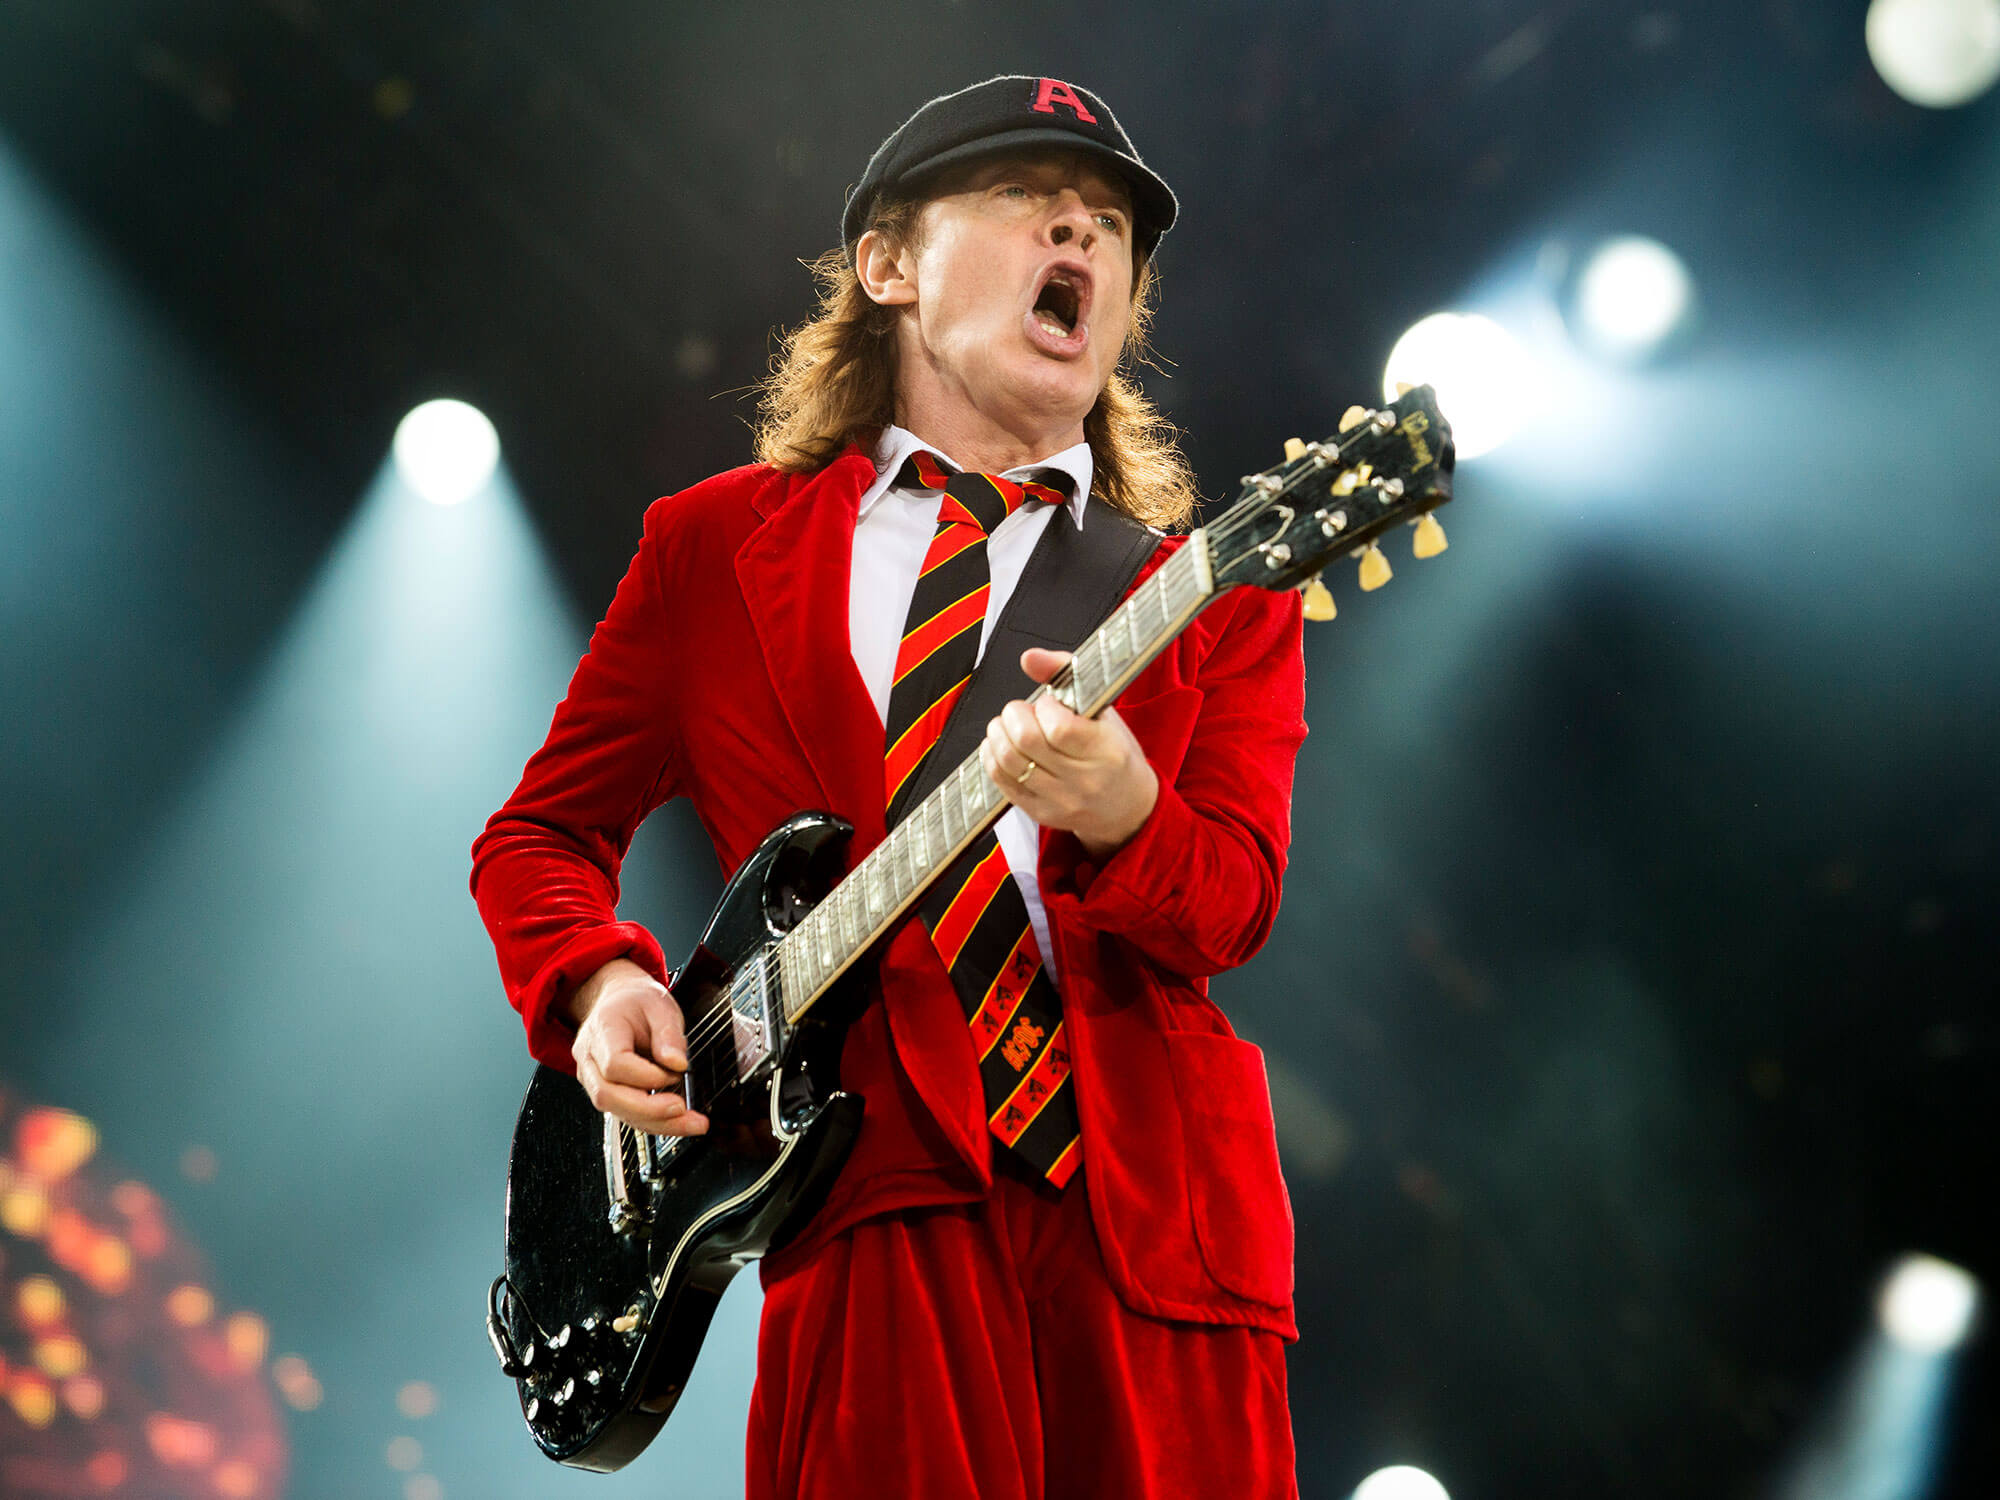 Angus Young performing live